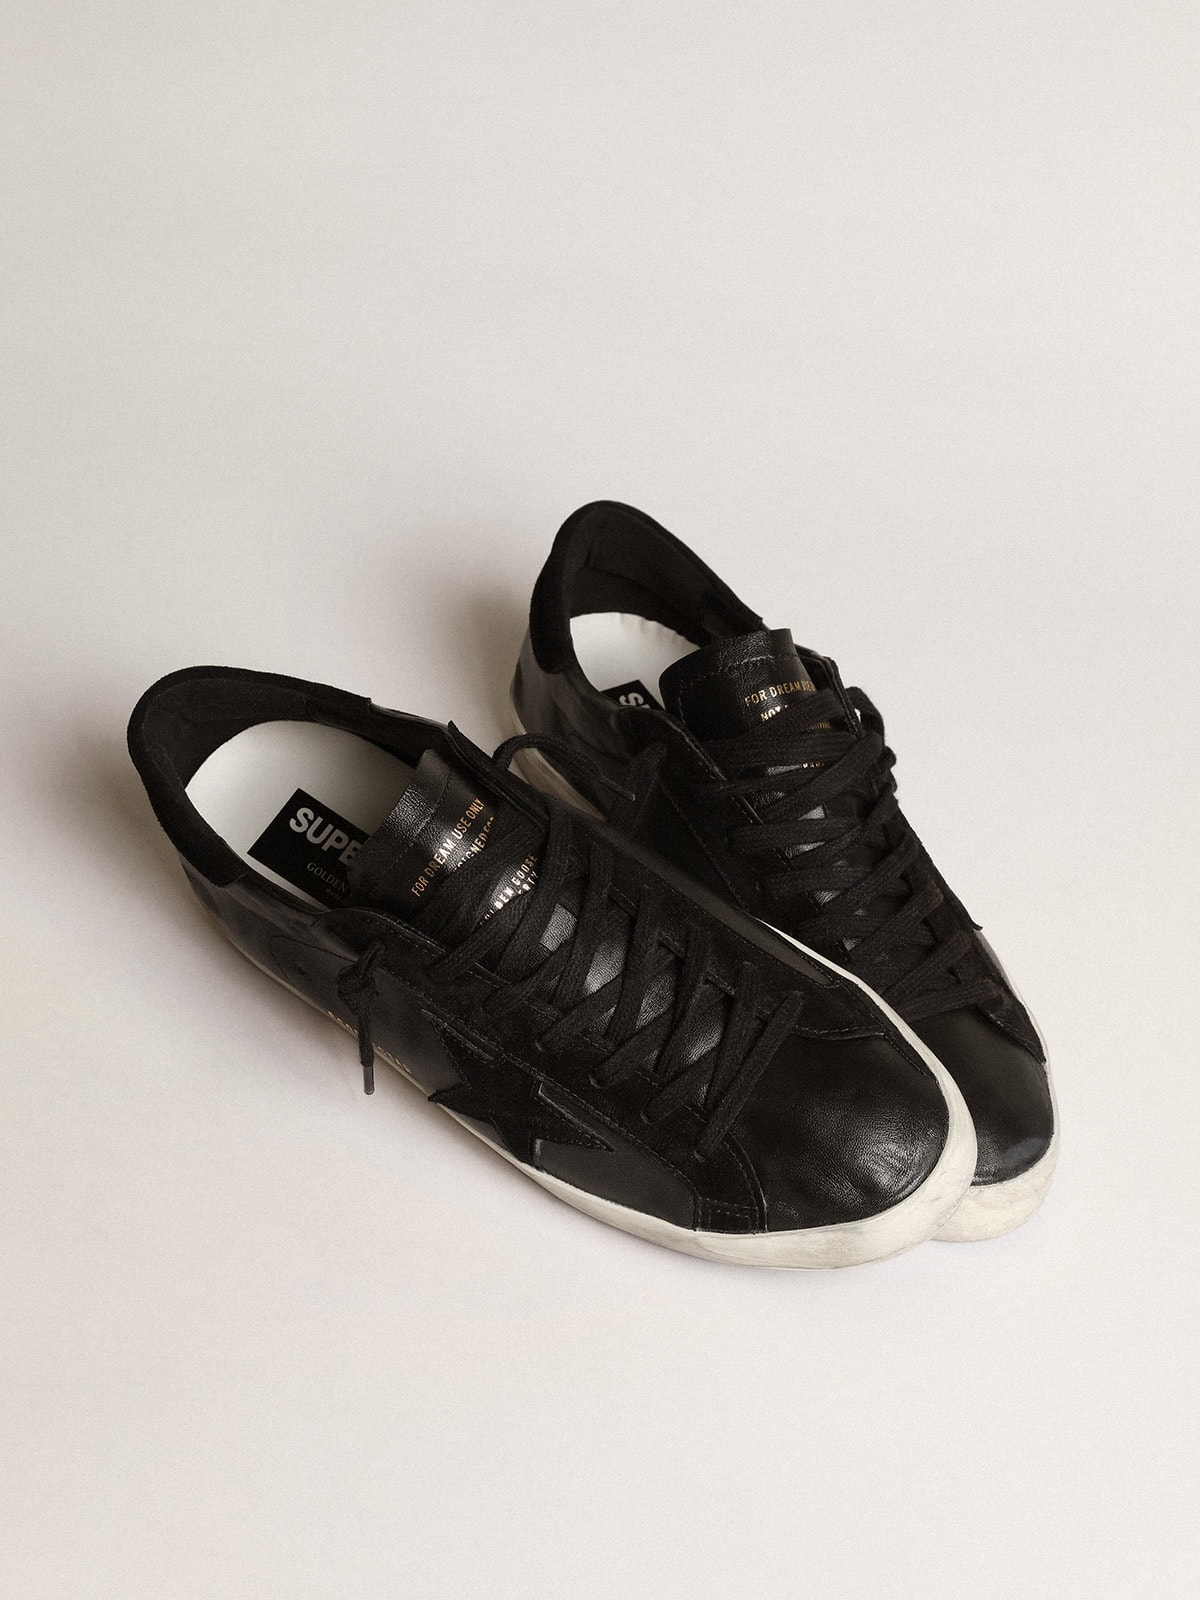 Men's Super-Star in black nappa with black suede star and heel tab